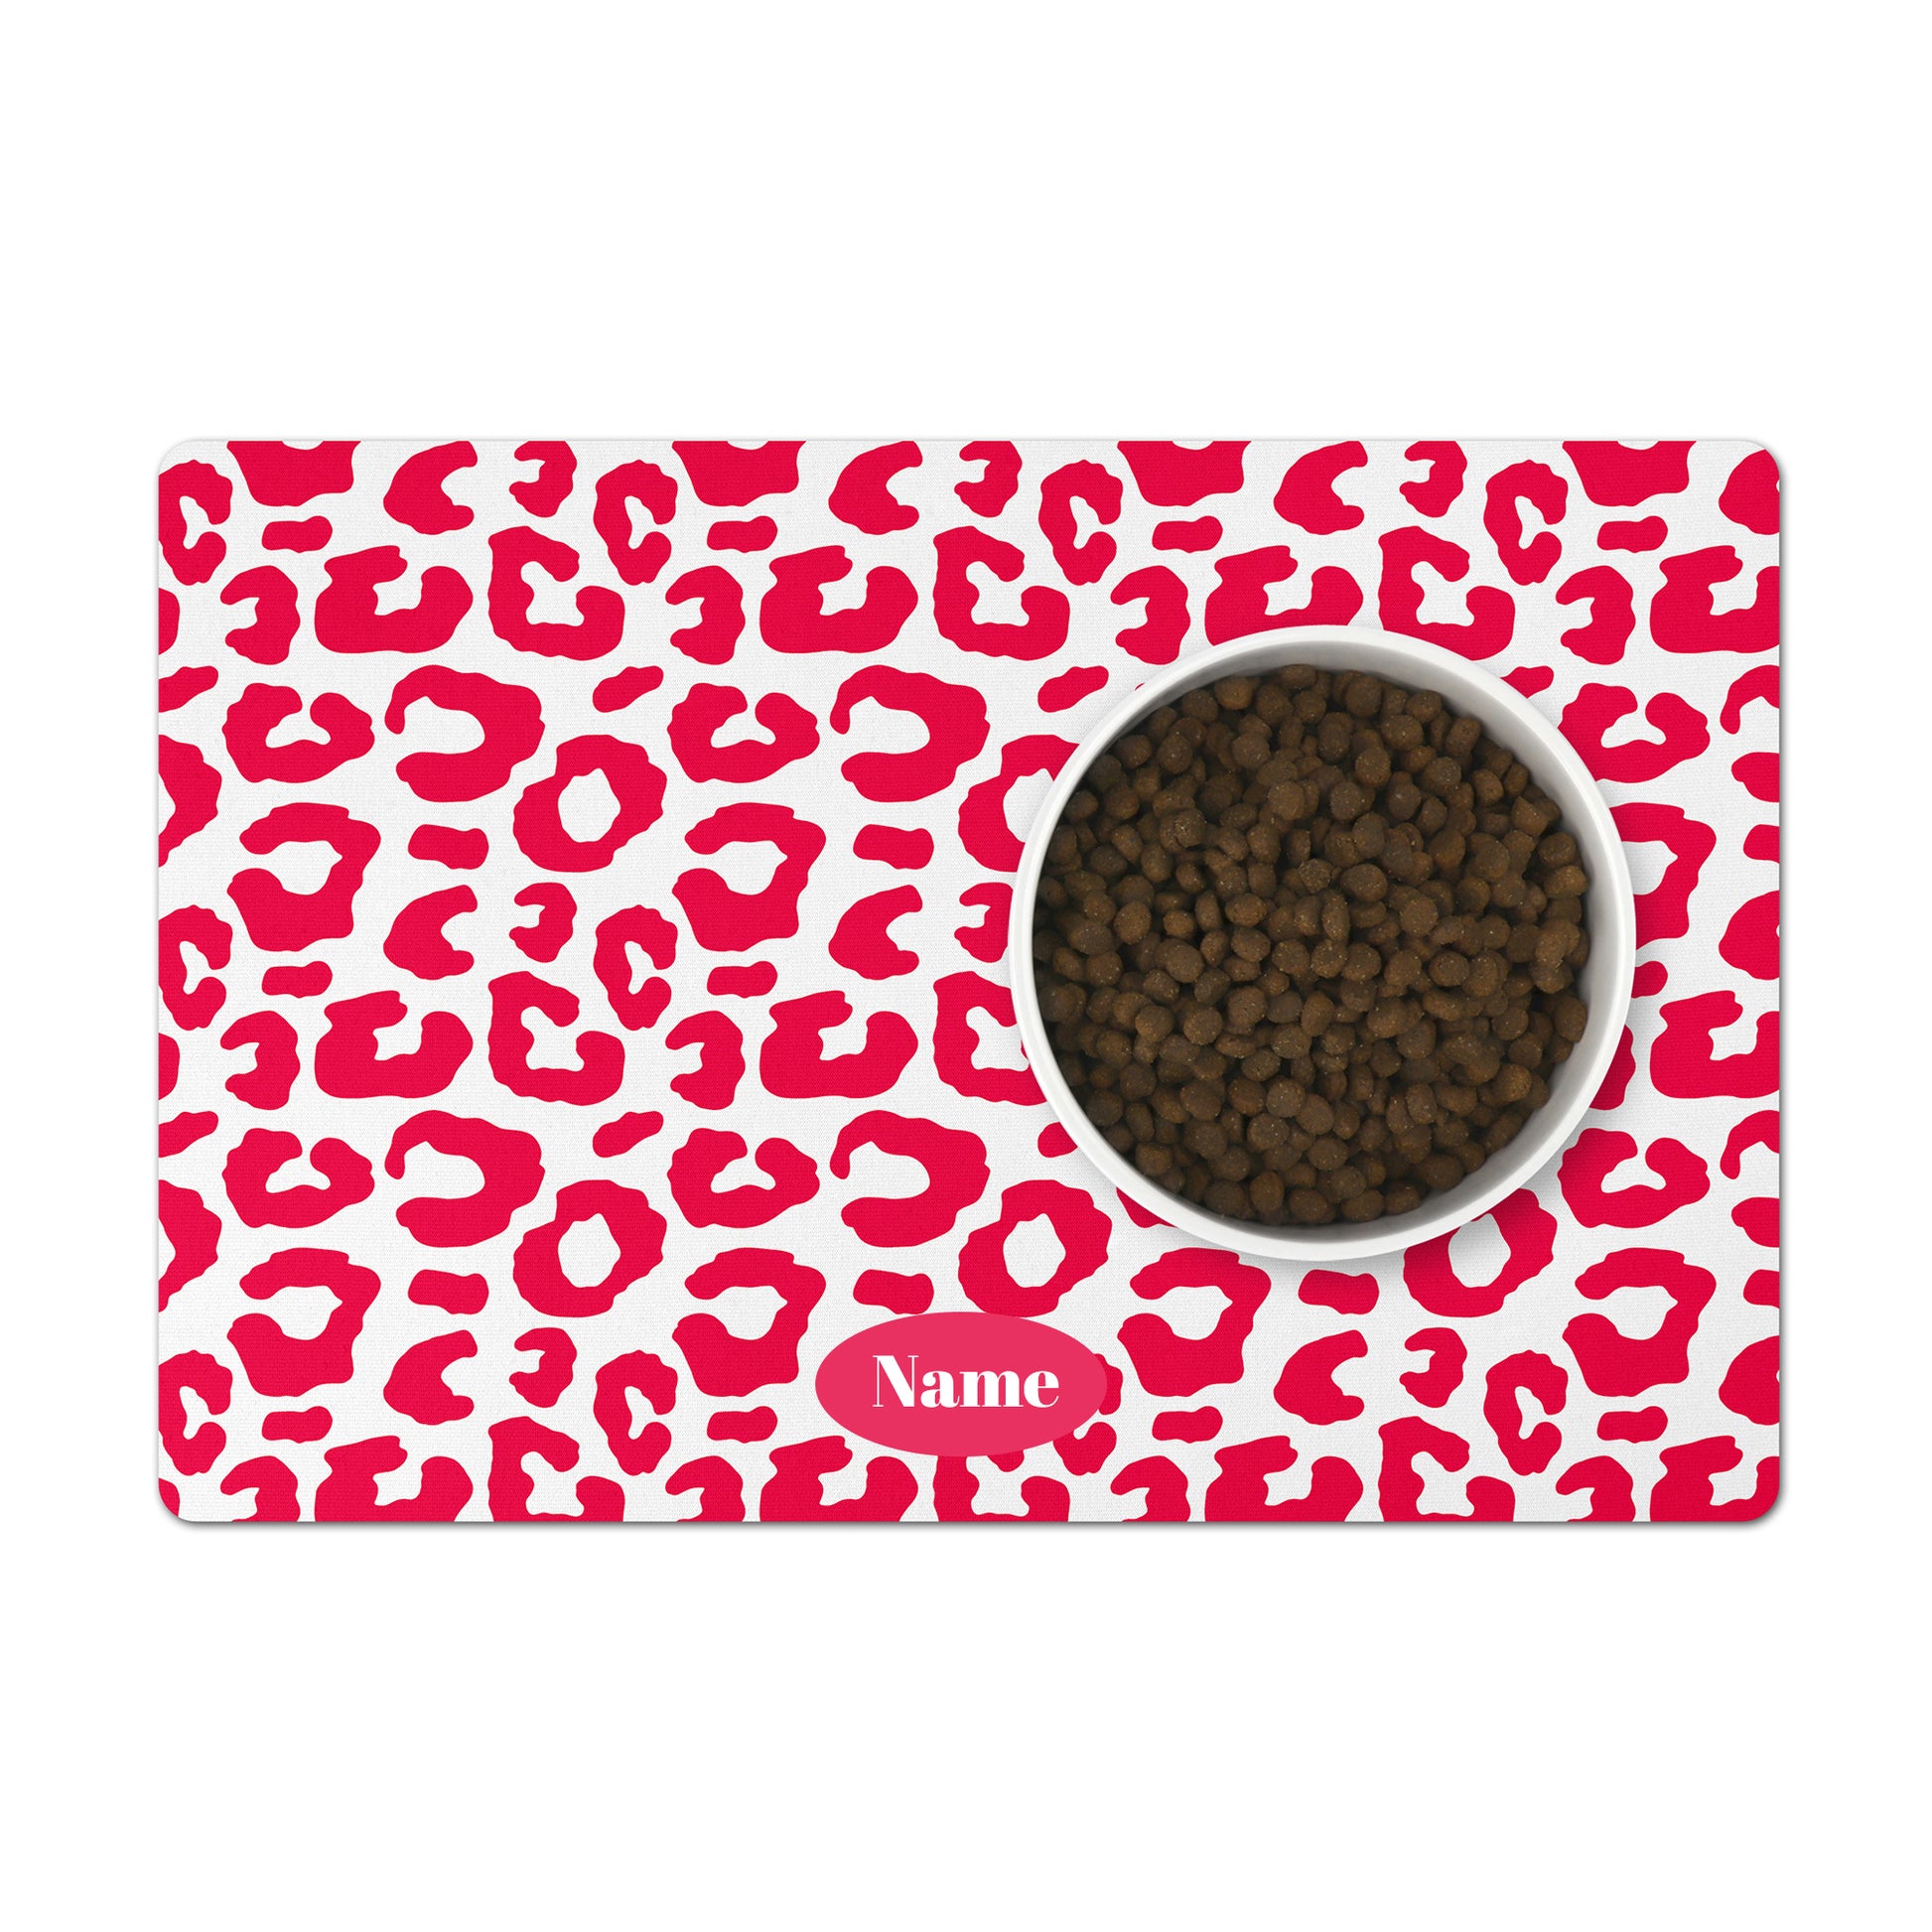 Personalized Leopard Pet Bowl Mat, Hot Pink Fuchsia and White